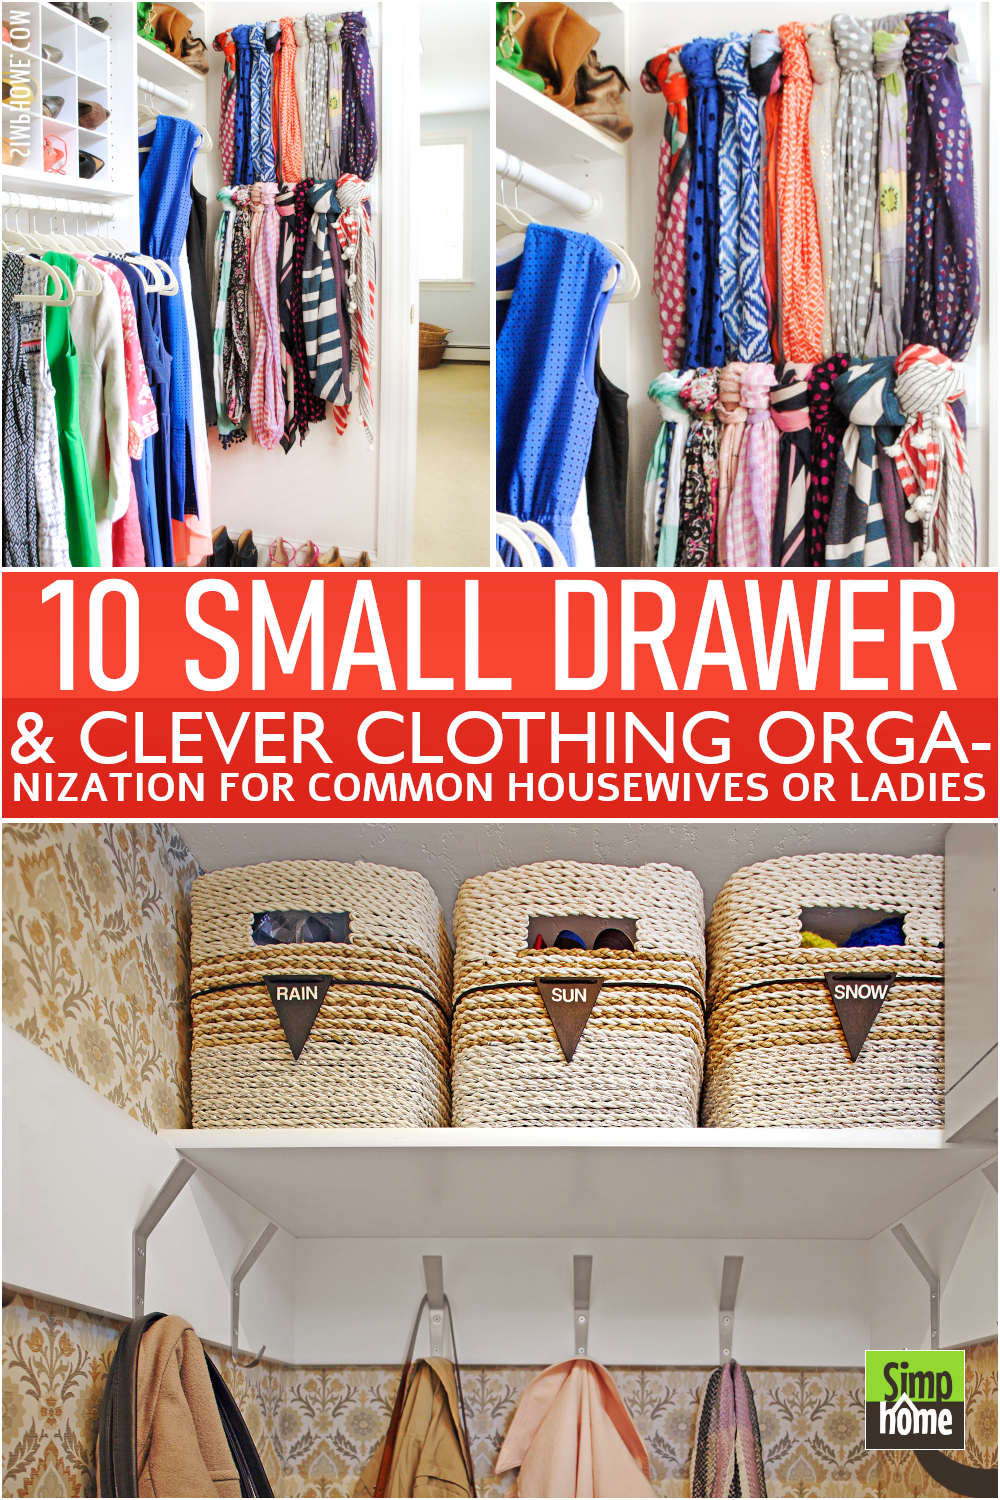 10 Small Drawers and Clever Clothing Organizations poster from Simphome